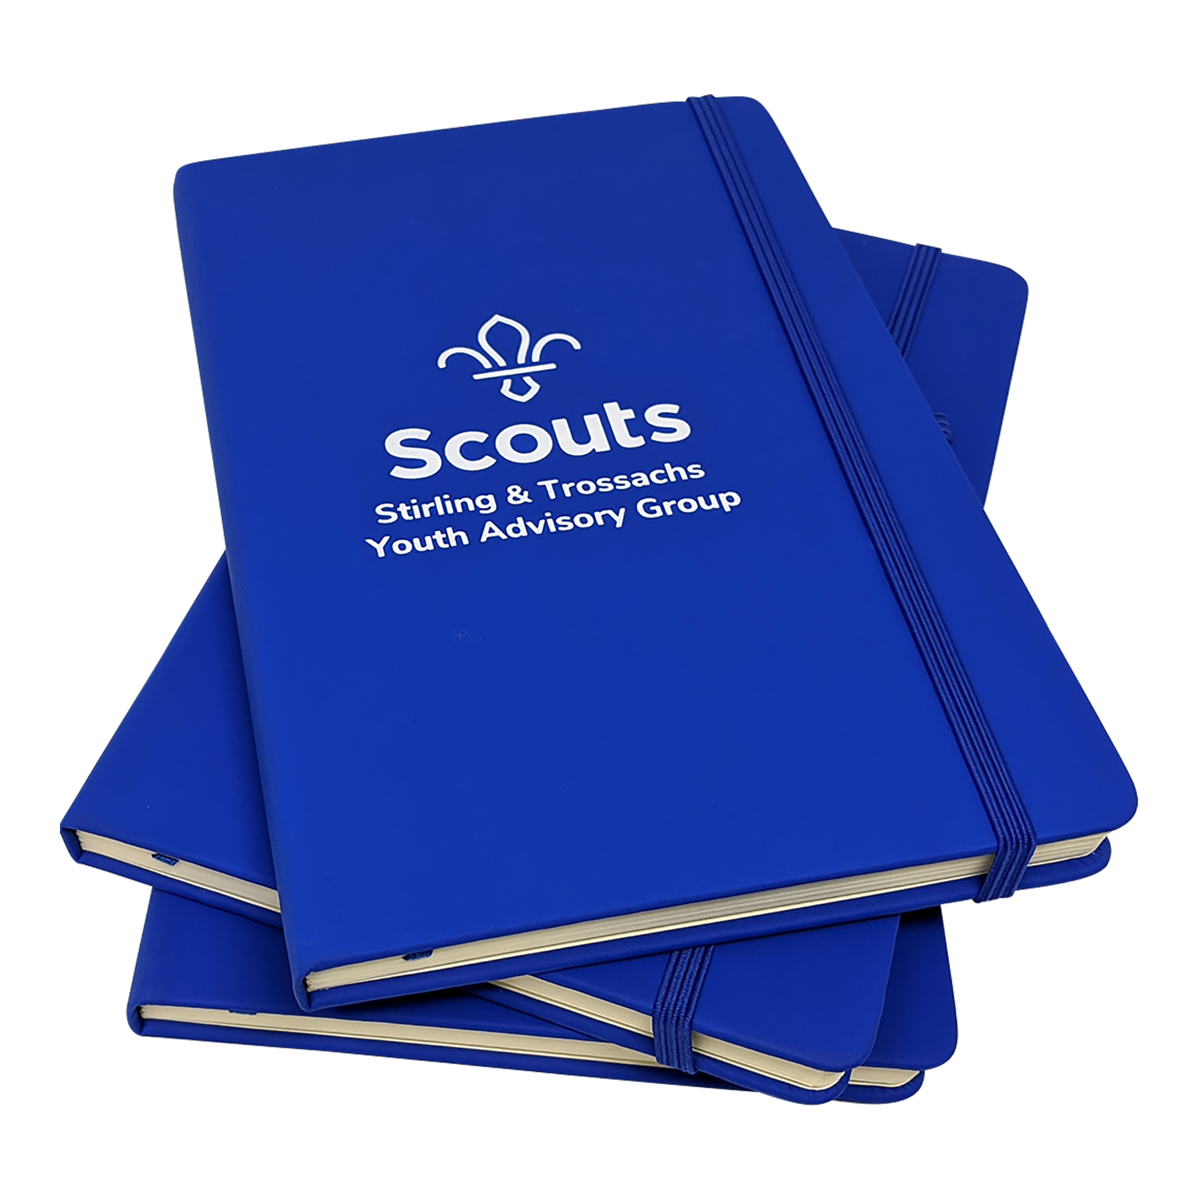 Scouts Stirling & Trossachs notebook